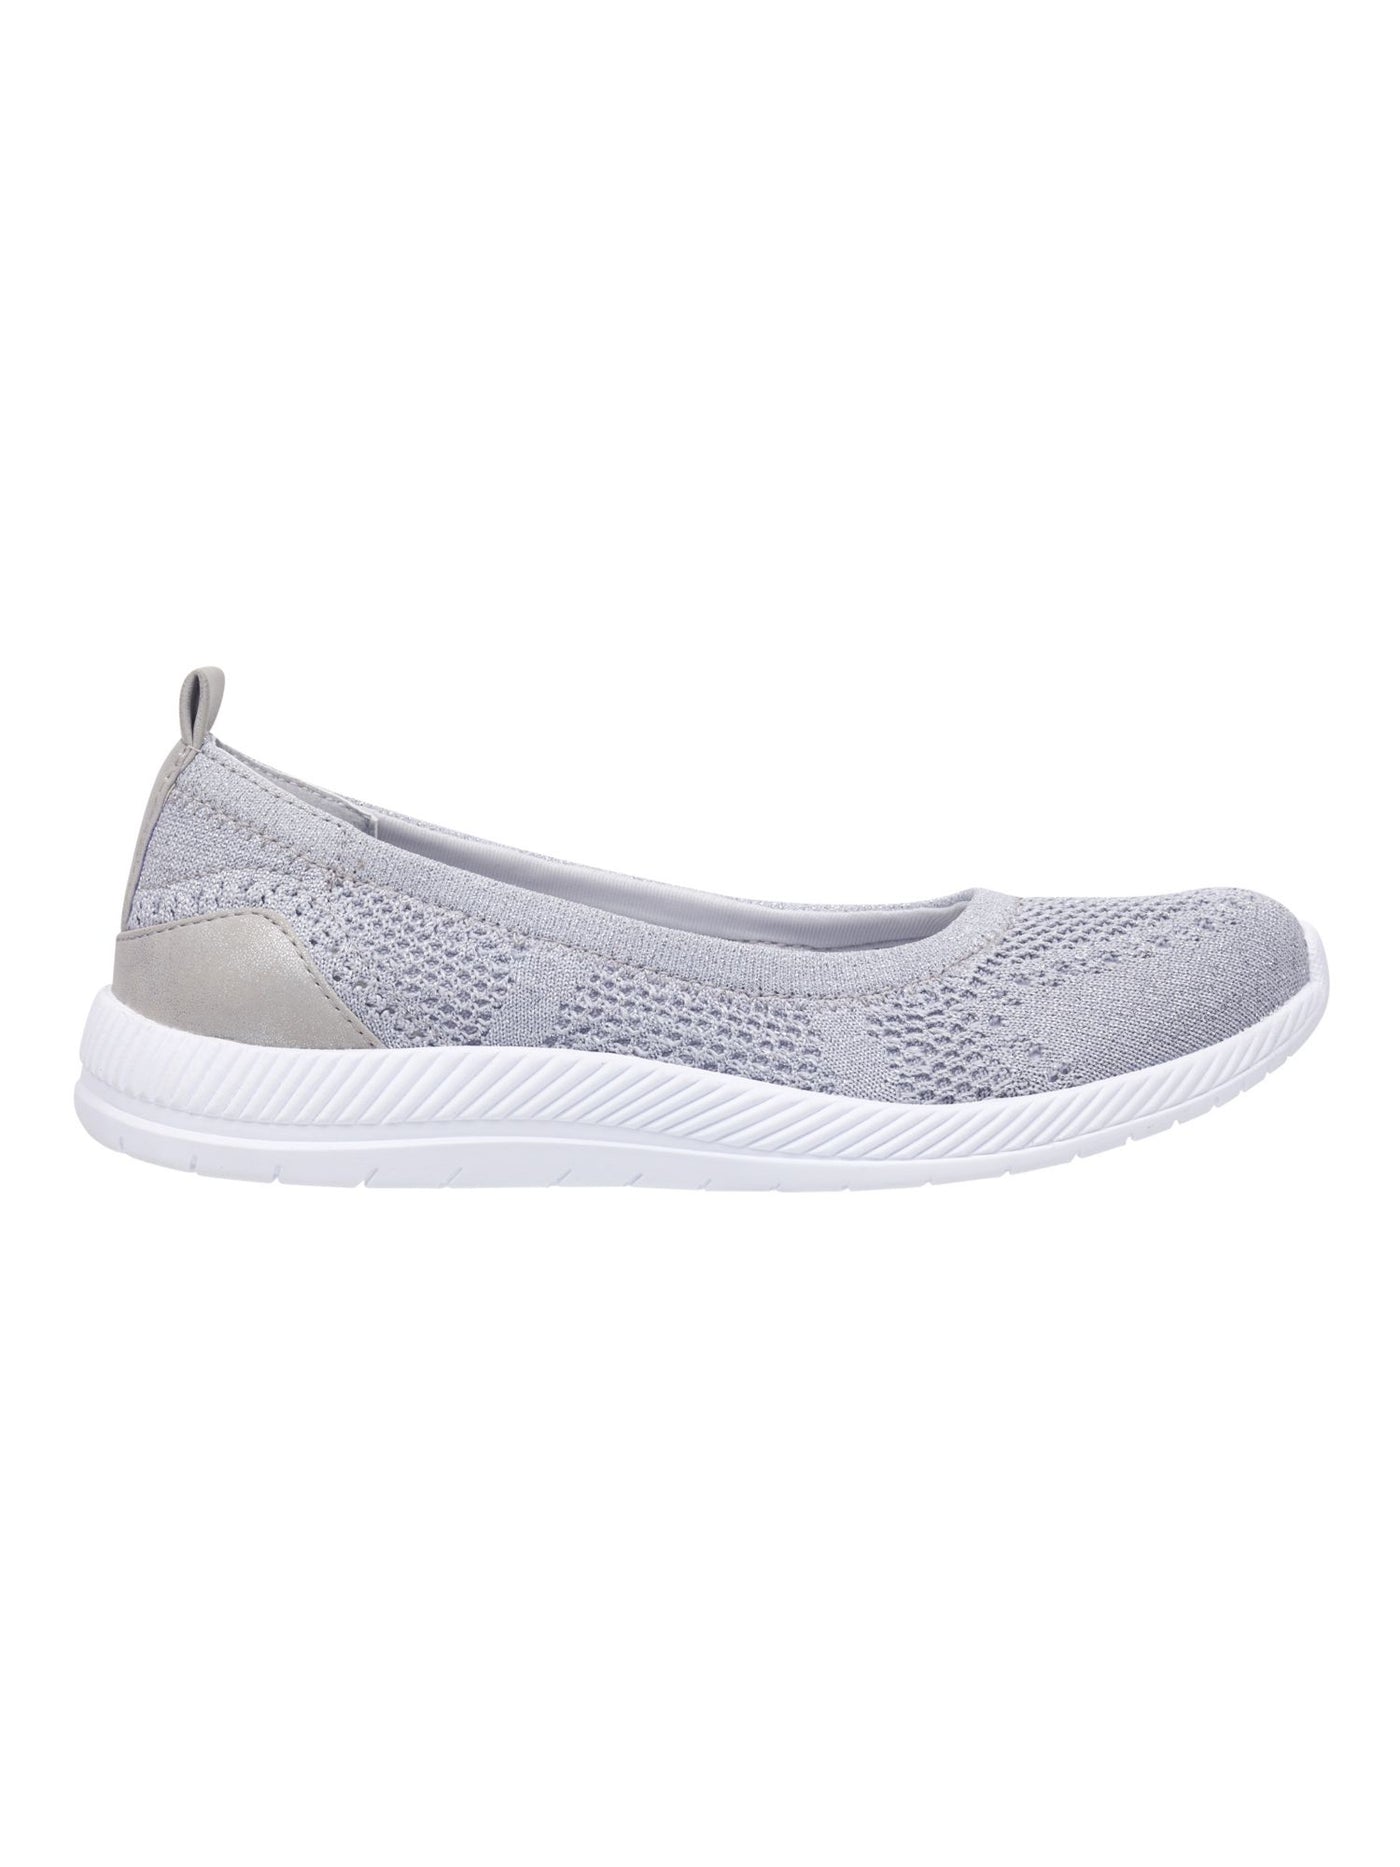 EASY SPIRIT Womens Silver Removable Footbed Comfort Glitz Round Toe Slip On Athletic Walking Shoes 9.5 N